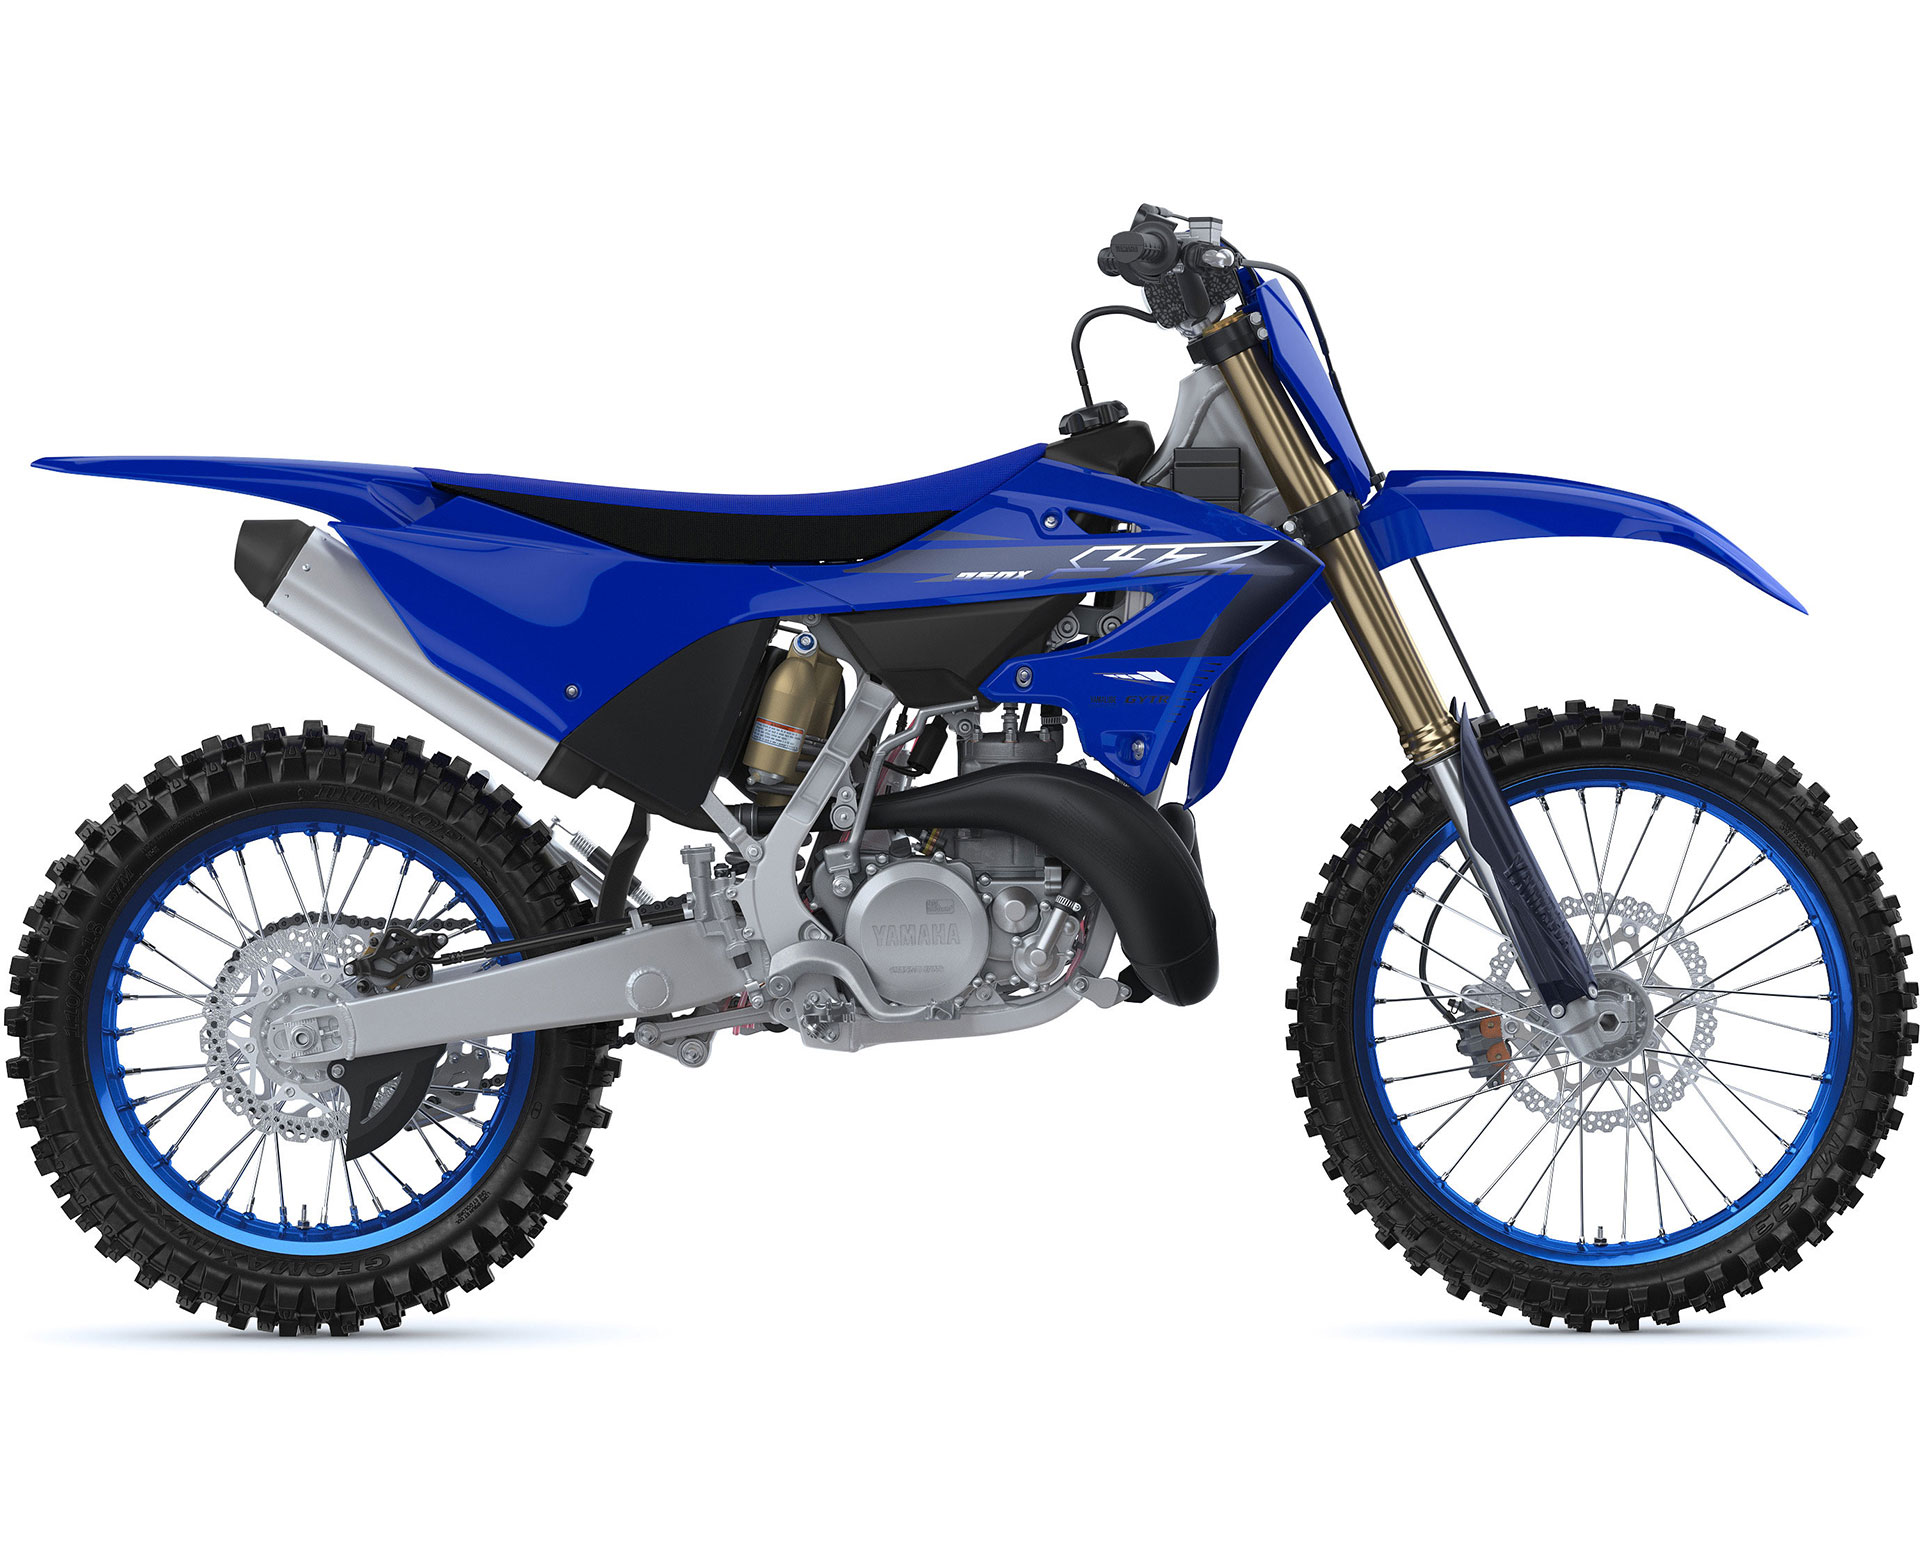 Thumbnail of your customized 2023 YZ250X